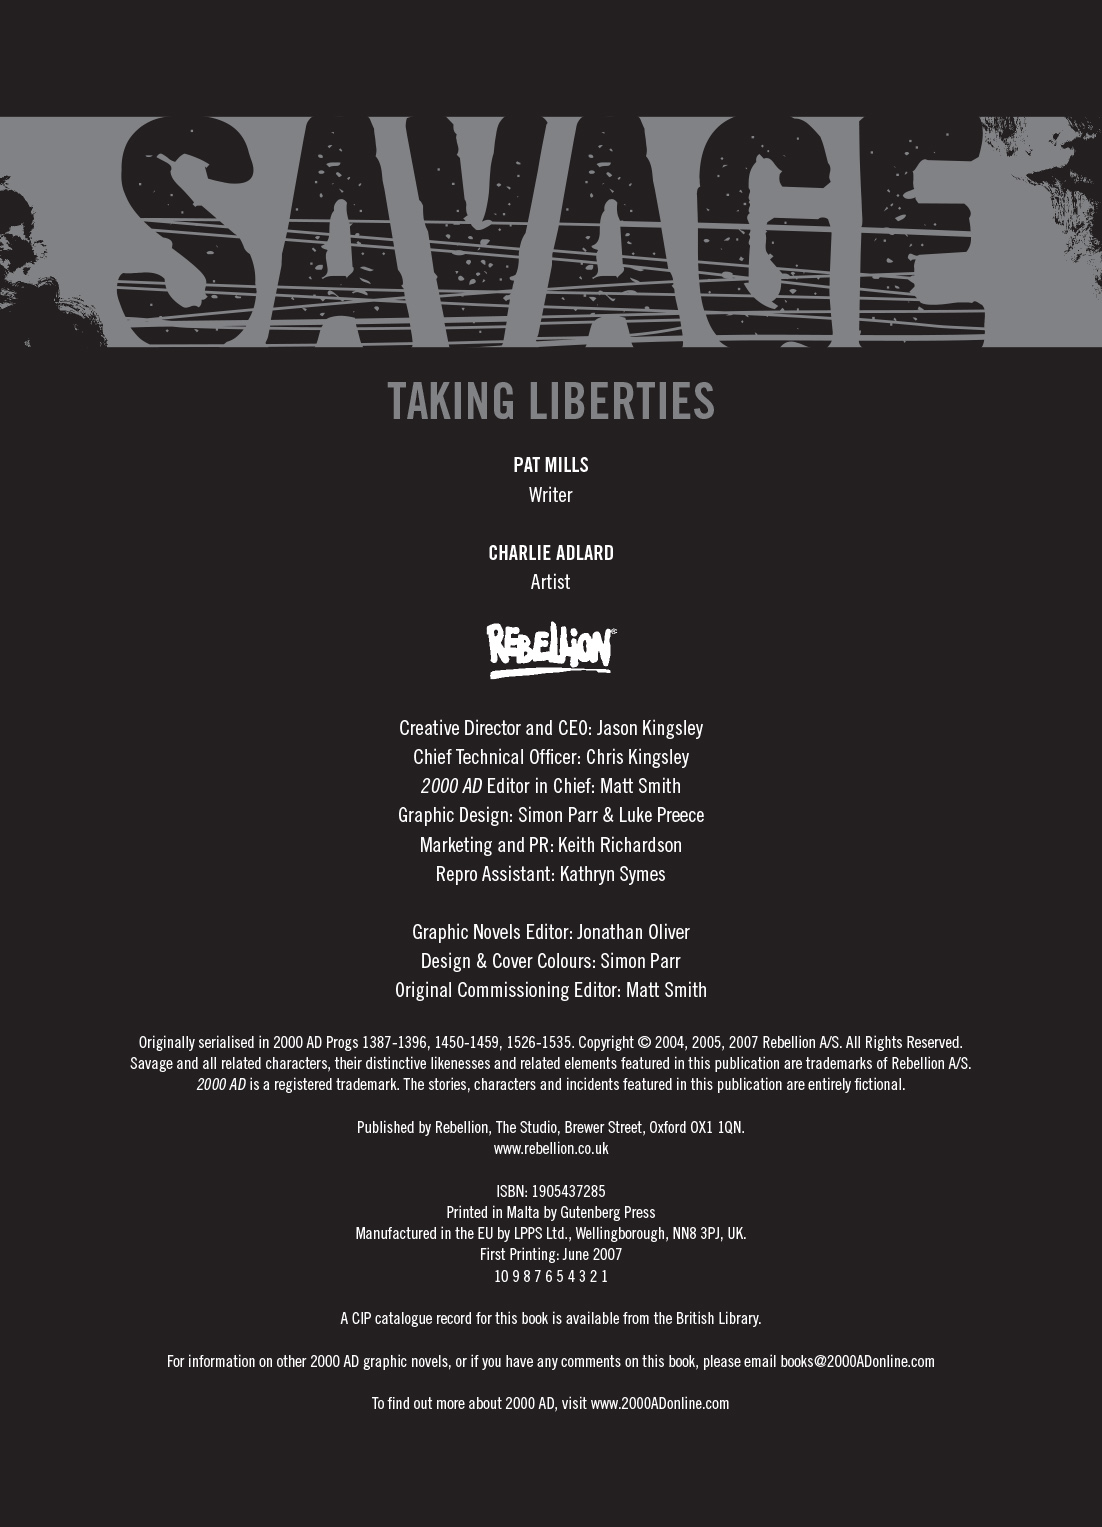 Read online Savage (2000 AD) comic -  Issue # TPB 1 (Part 1) - 4